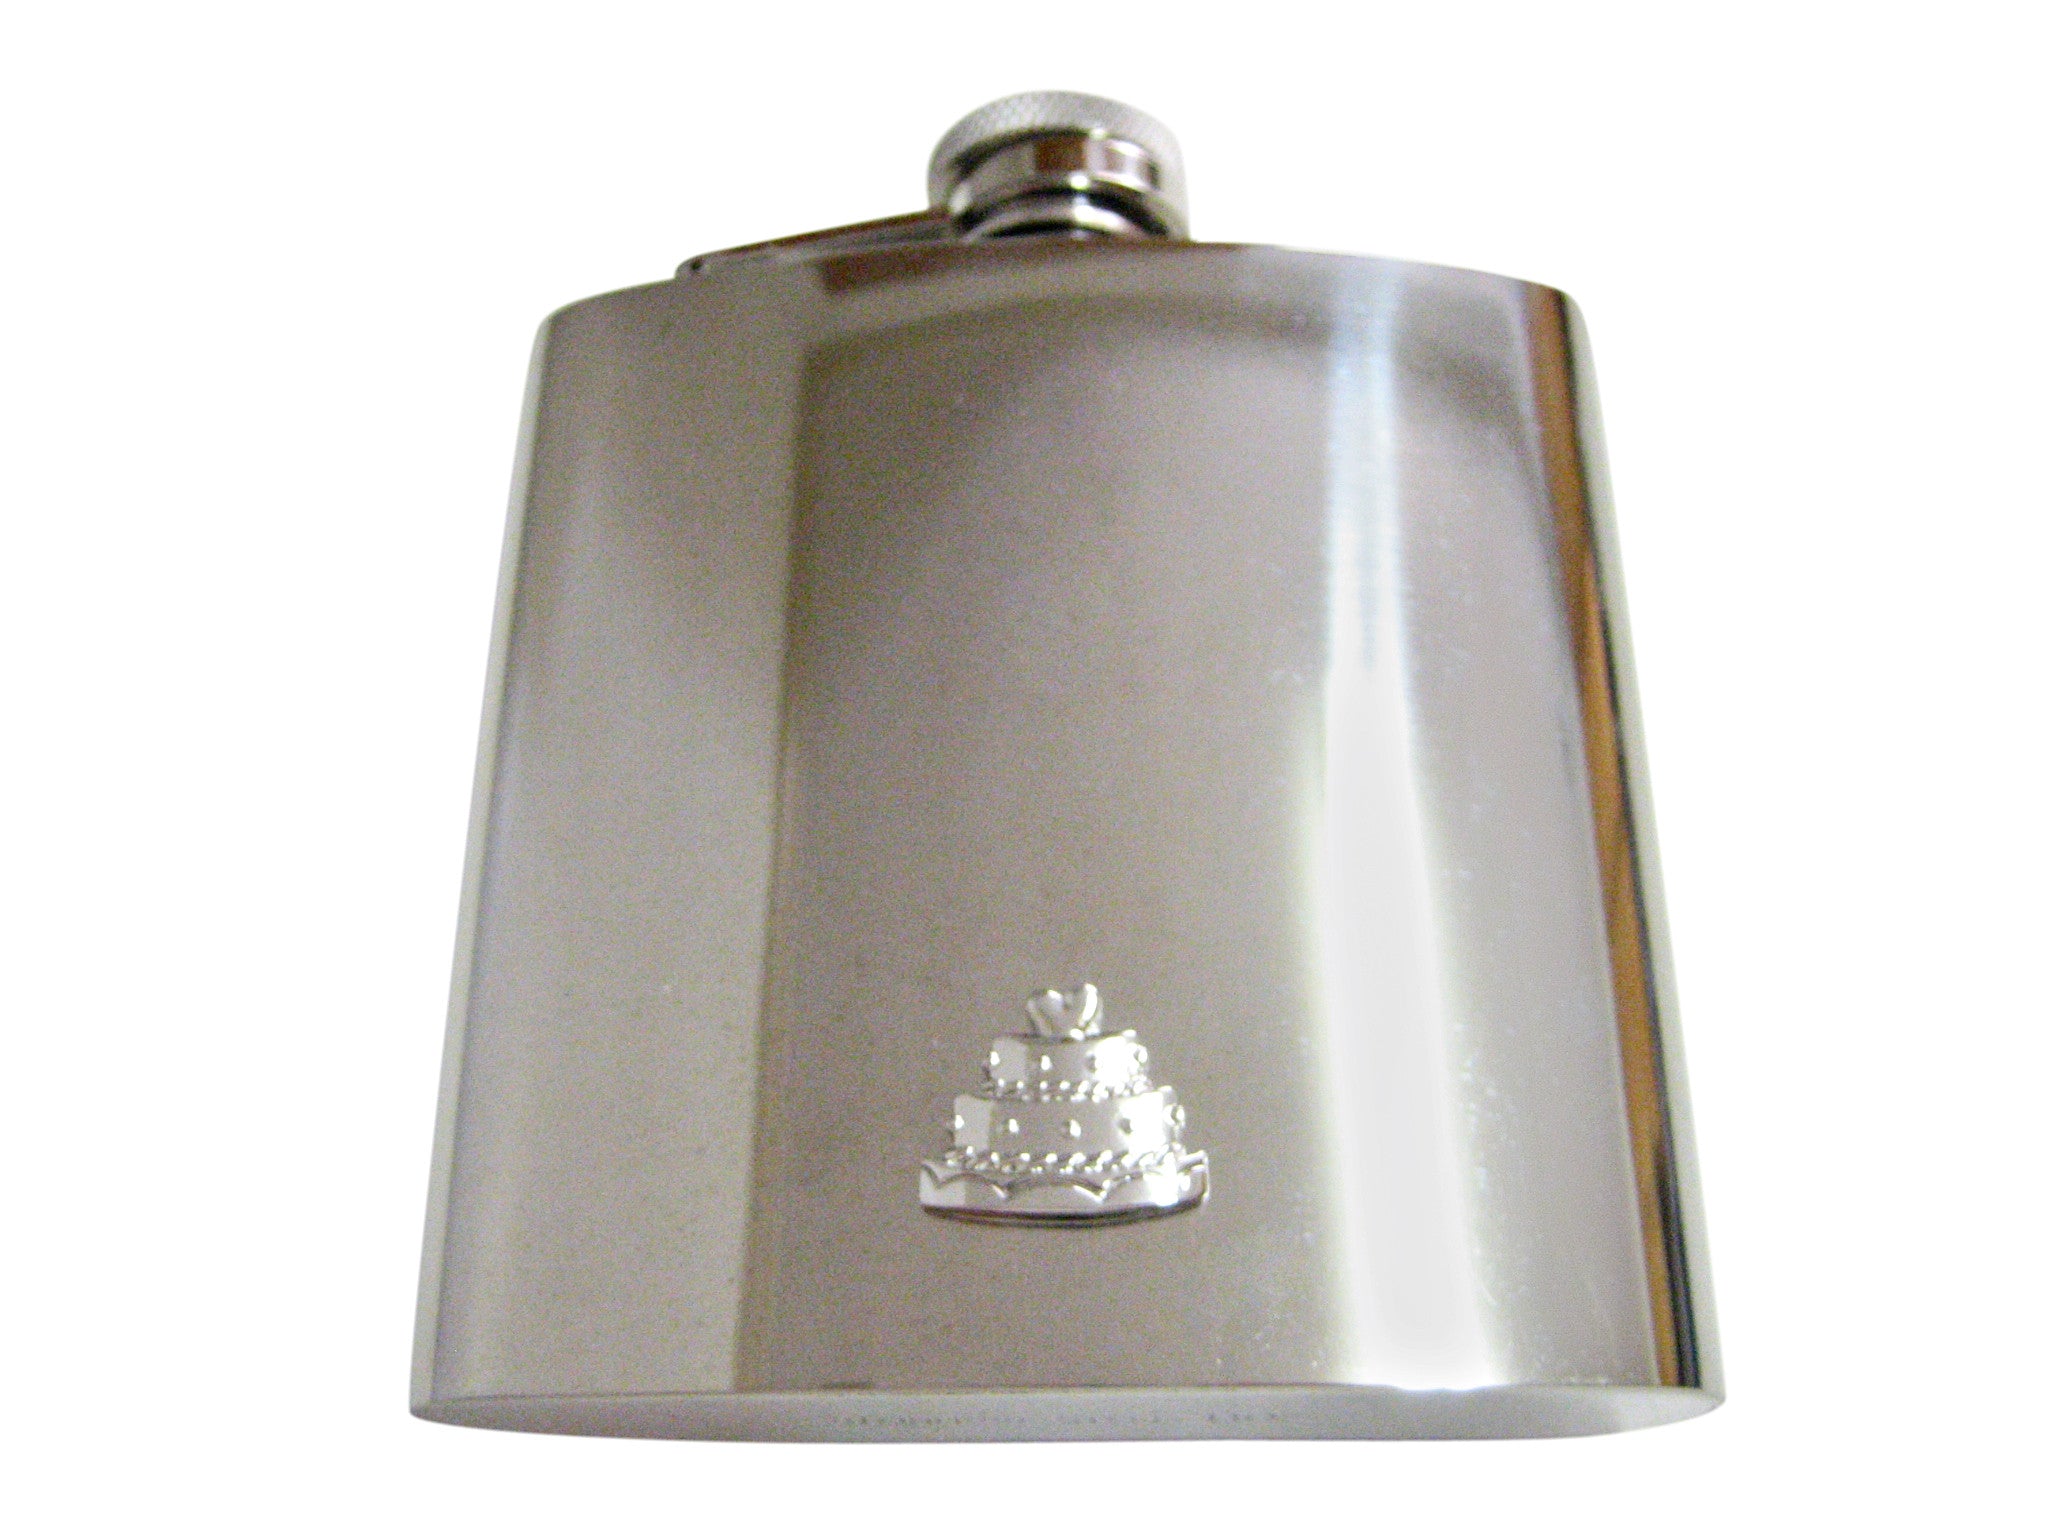 Silver Toned Cake 6 Oz. Stainless Steel Flask